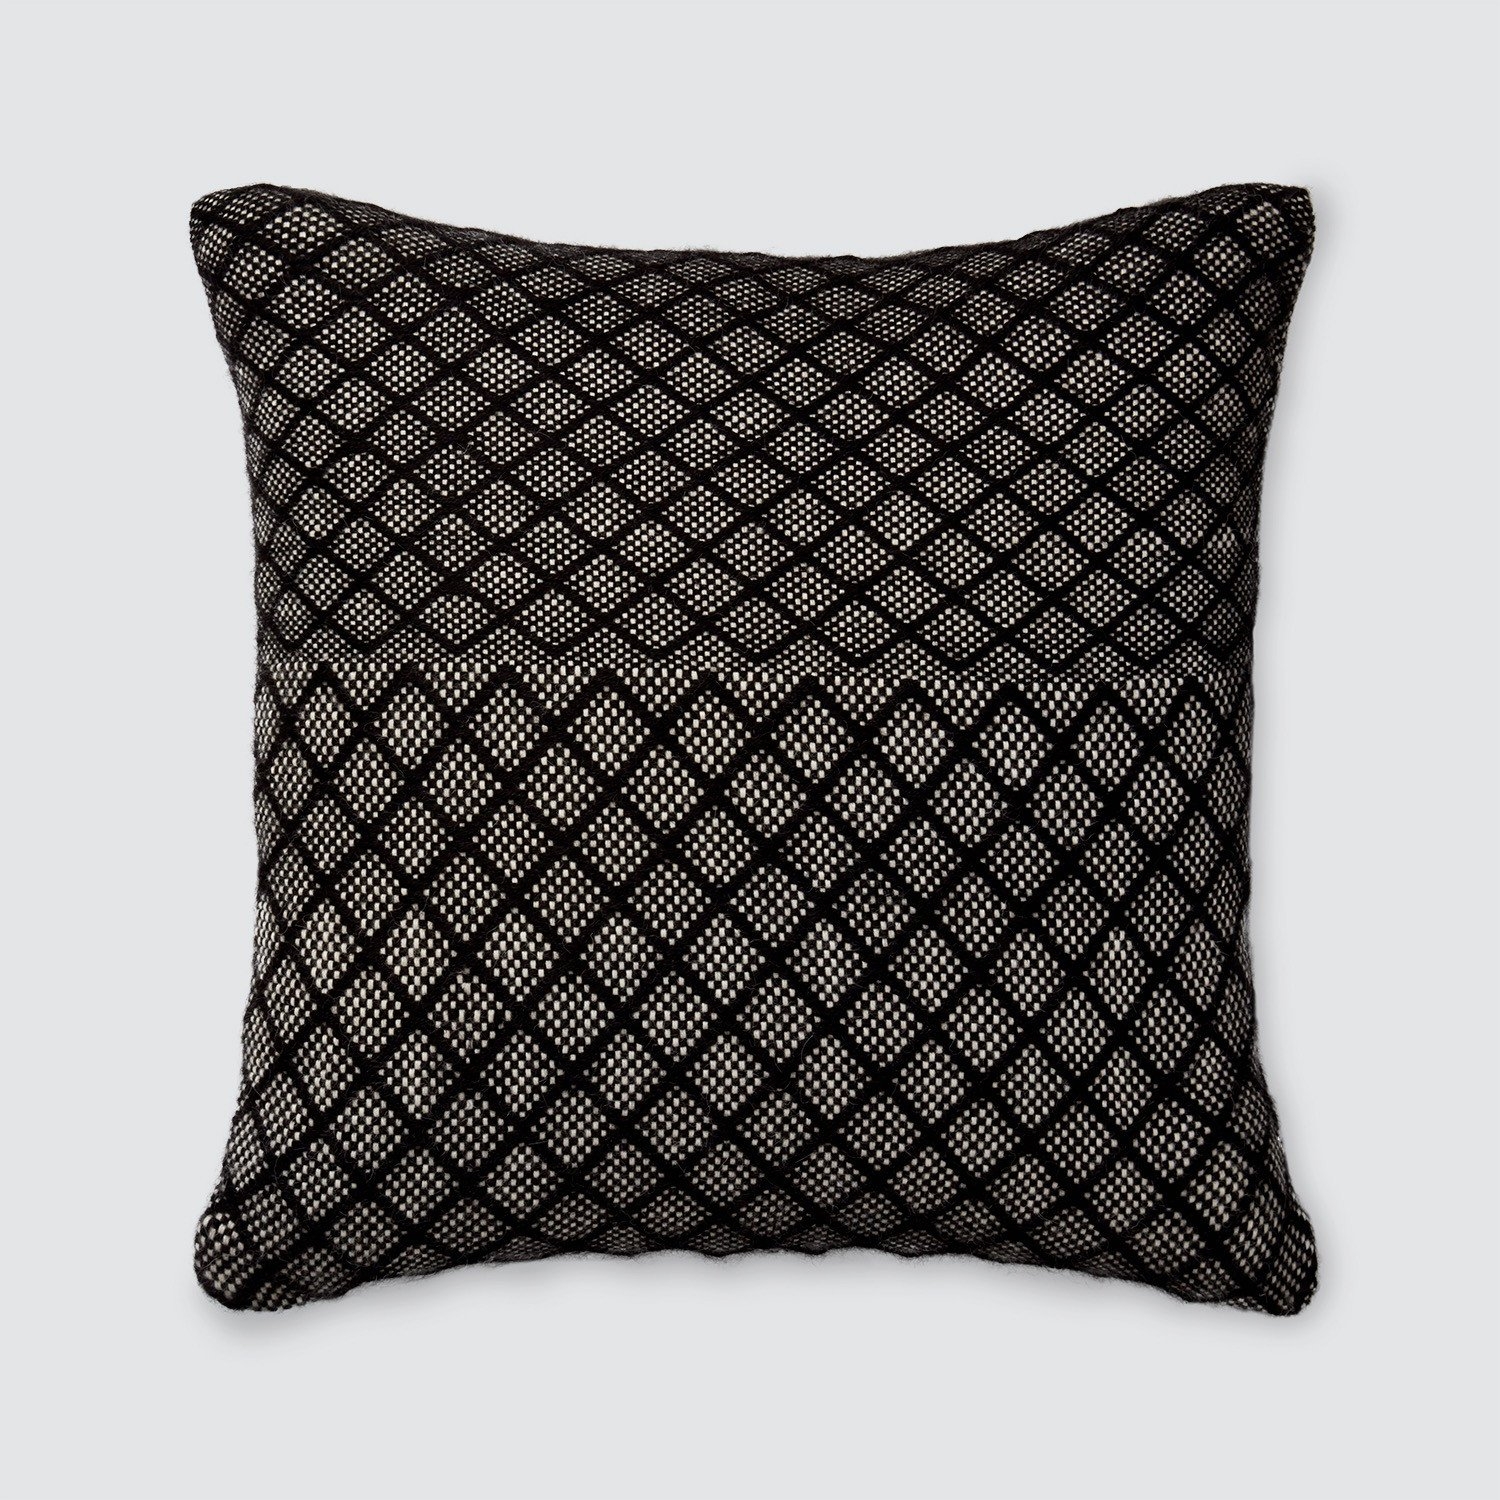 Milagro Pillow - Black By The Citizenry - Image 0